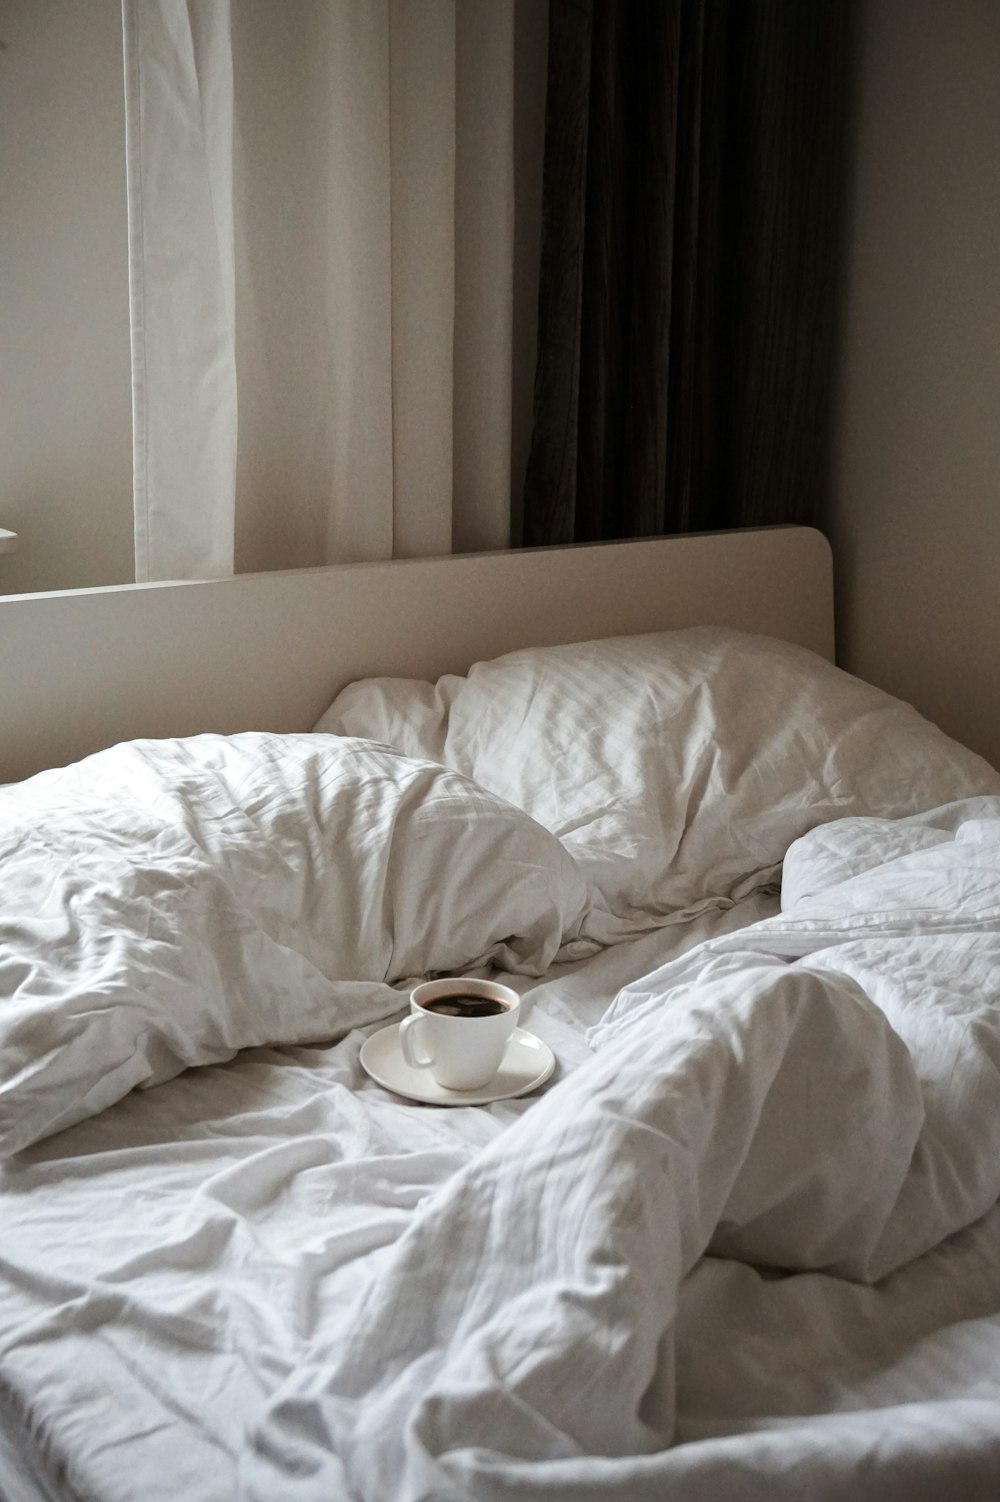 coffee on cup on bed